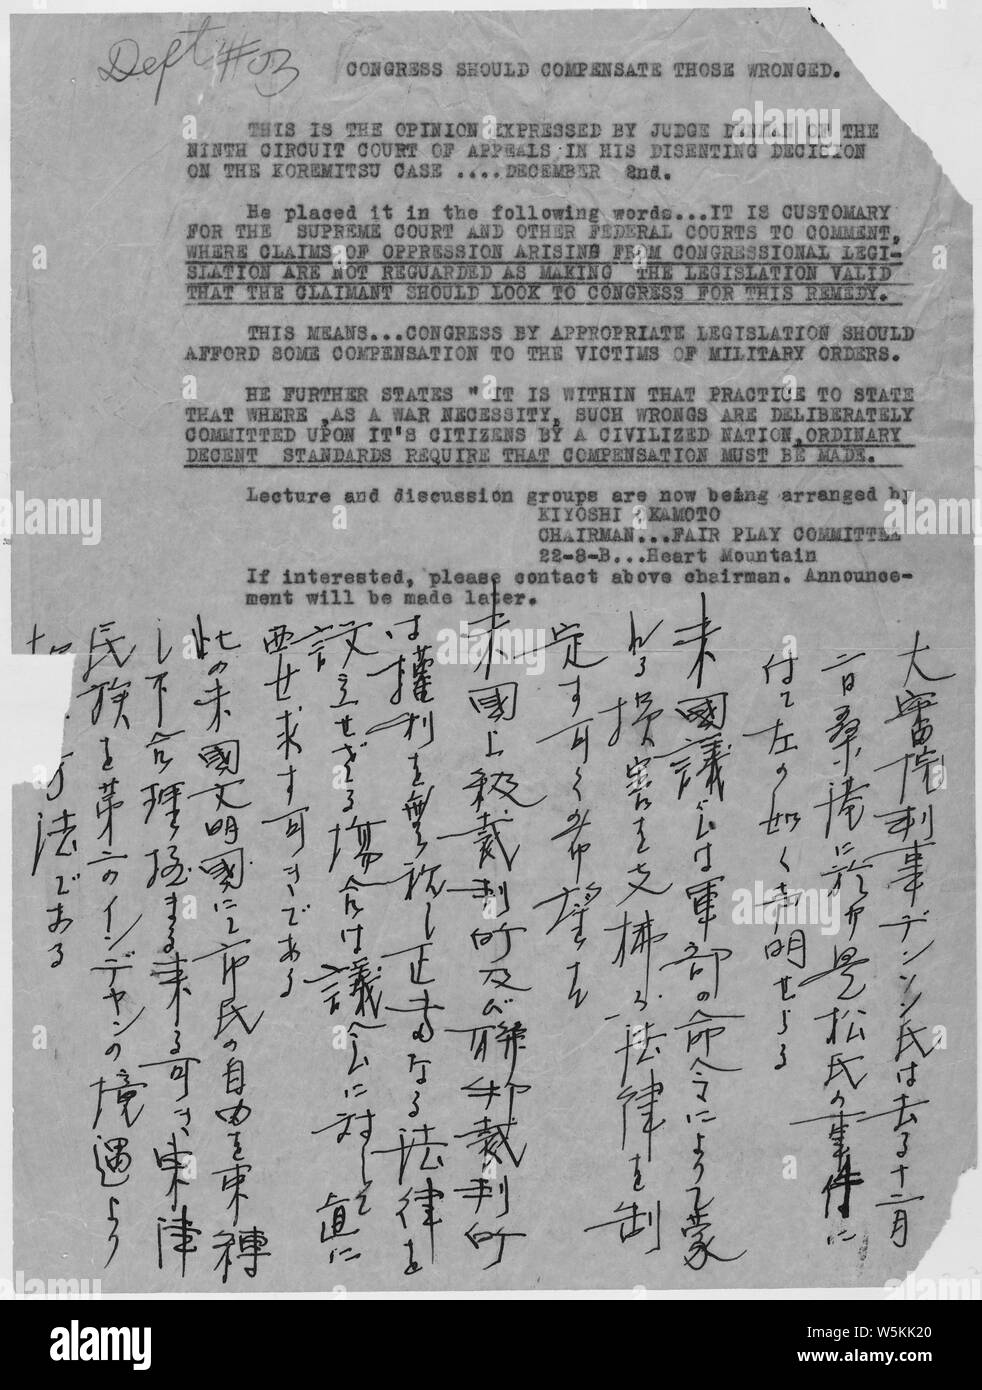 Congress Should Compensate Those Wronged - Commentary by Kiyoshi Okamoto to fellow Heart Mountain internees regarding federal court decision on Korematsu vs. U.S; Scope and content:  This document was included in the case of the United States of America vs. Kiyoshi Okamoto, et. al. The prosecution of Okamoto, et. al. (Case #4930) stems directly from the Heart Mountain draft resistance movement that also resulted in the conviction of Shigeru Fujii and 62 others as documented in U.S. District Court Case #4928. Okamoto and his co-defendants, members of the so-called Fair Play Committee, were indi Stock Photo